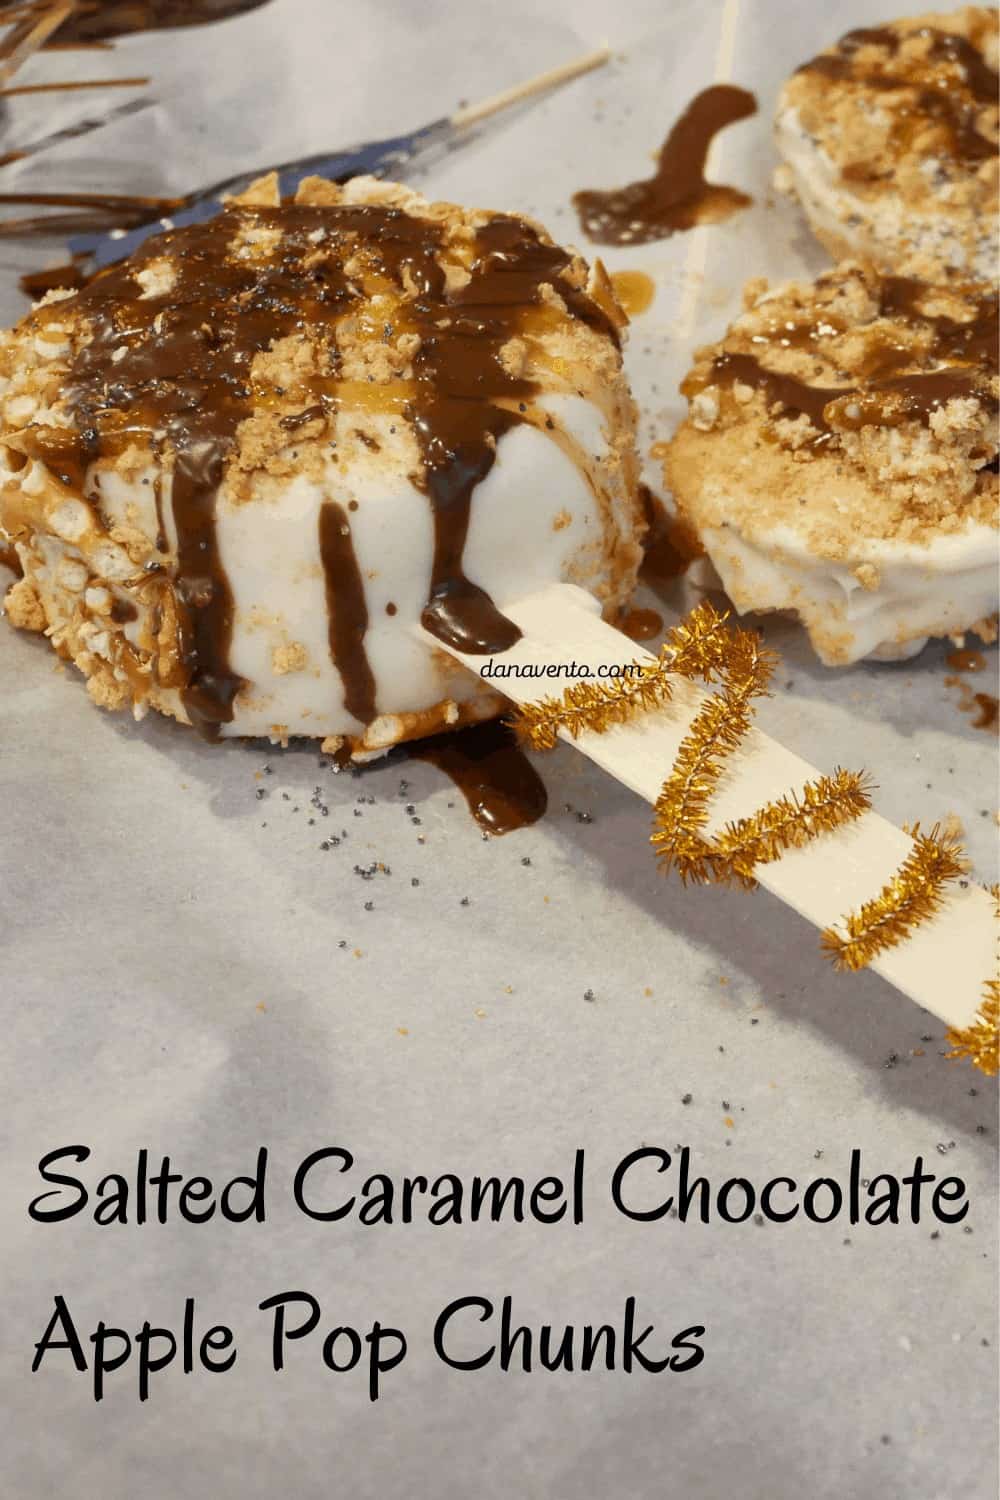 Salted caramel chocolate apple pops that are easy to make on a tray